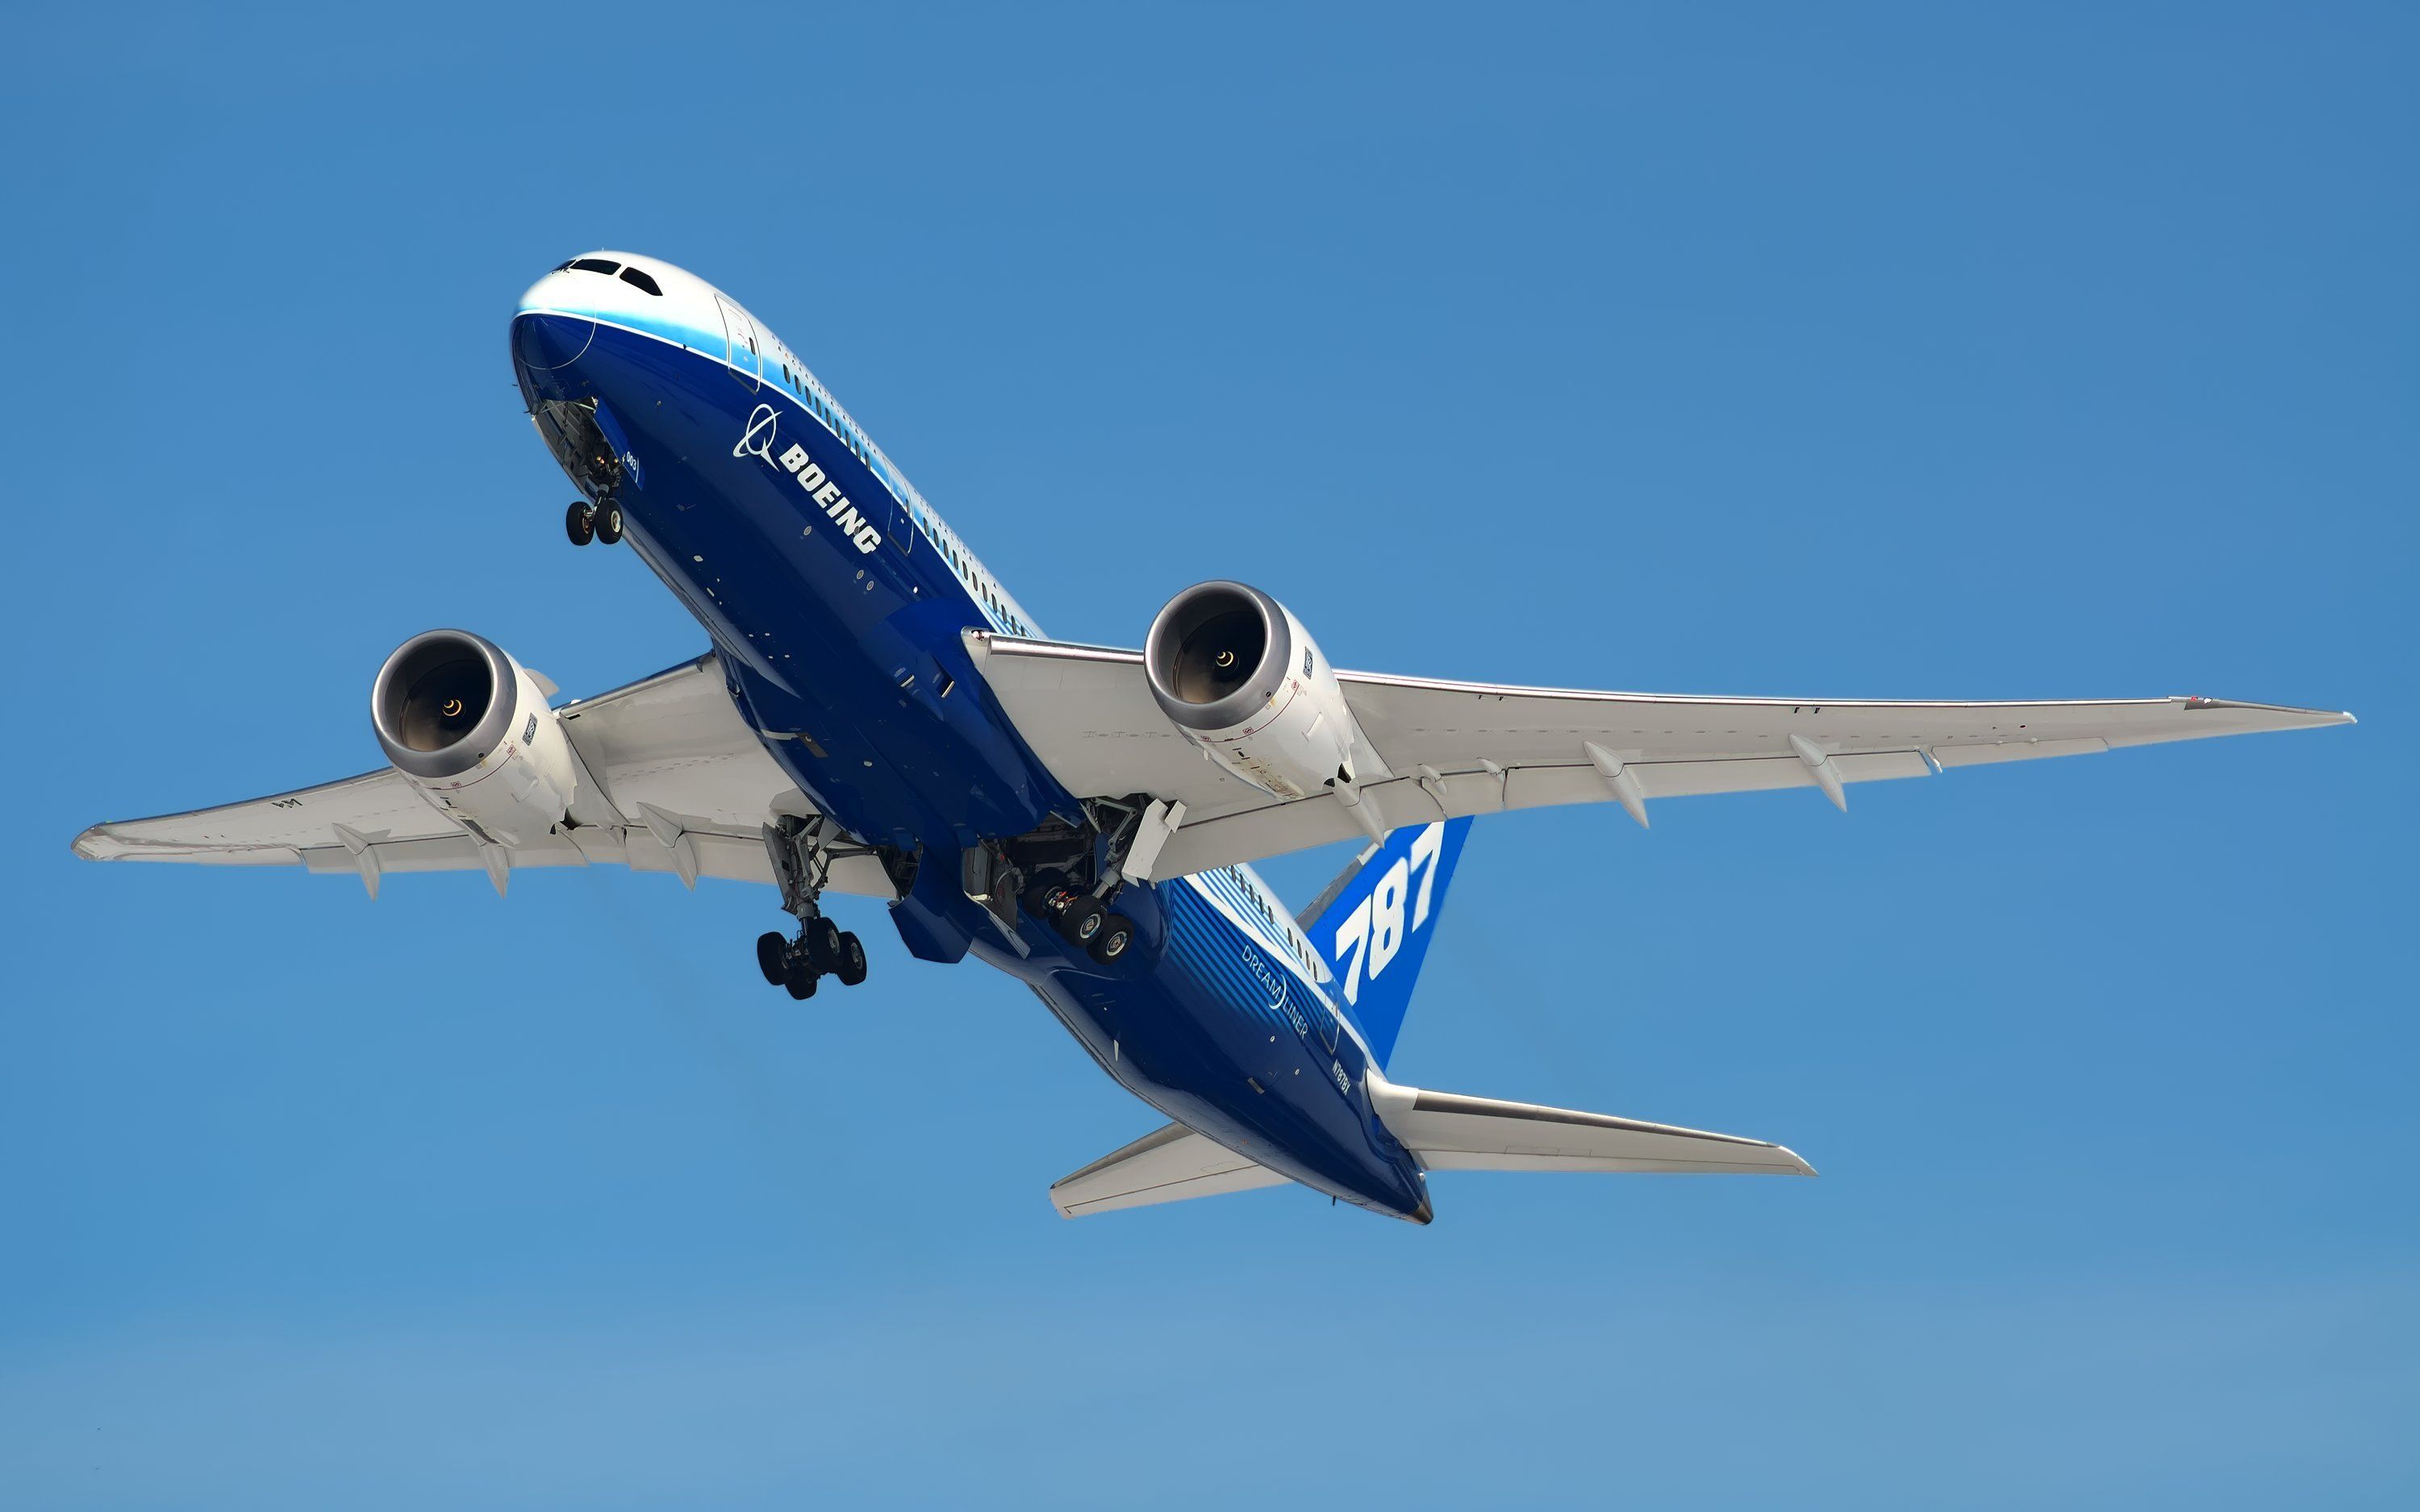 The Technical Features That Made The Boeing 787 Stand Out From The 